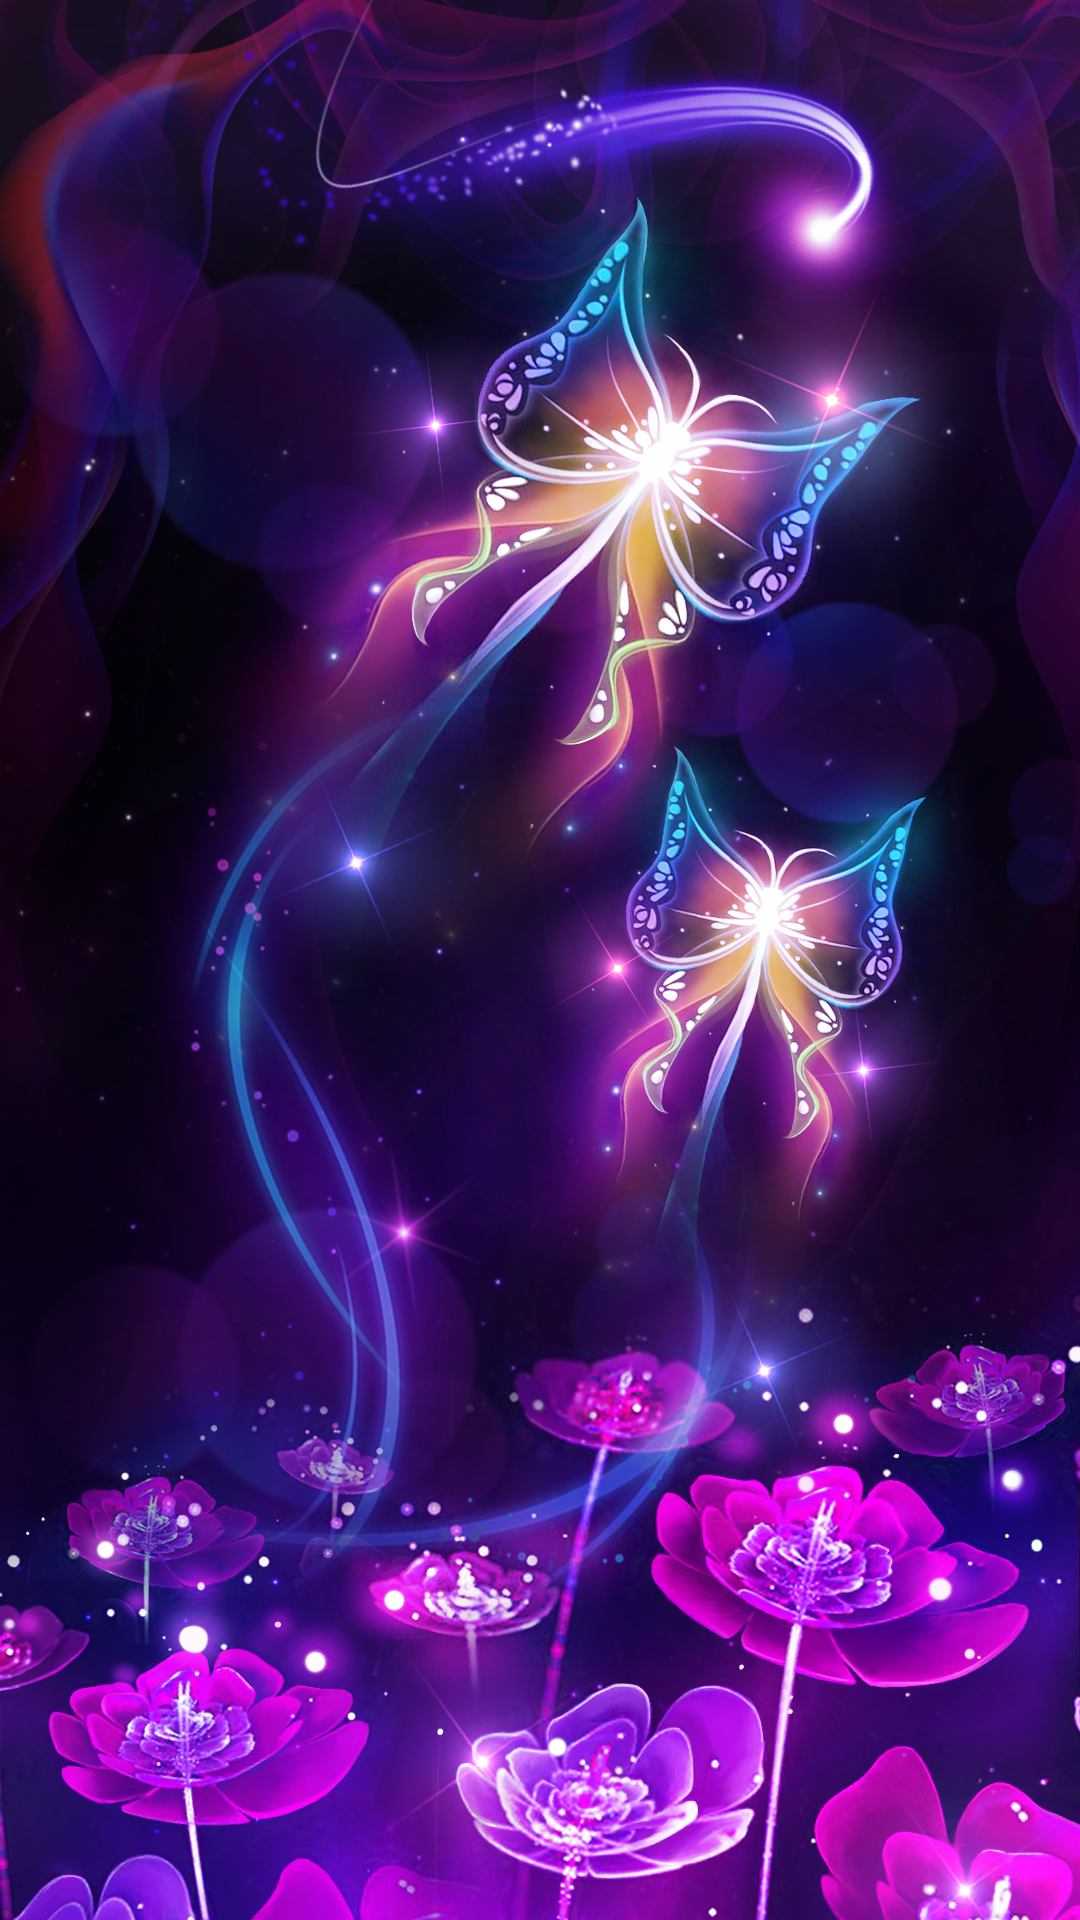 Shiny Neon Butterfly Live Wallpaper Android Live Wallpaper/background - Neon Butterfly , HD Wallpaper & Backgrounds